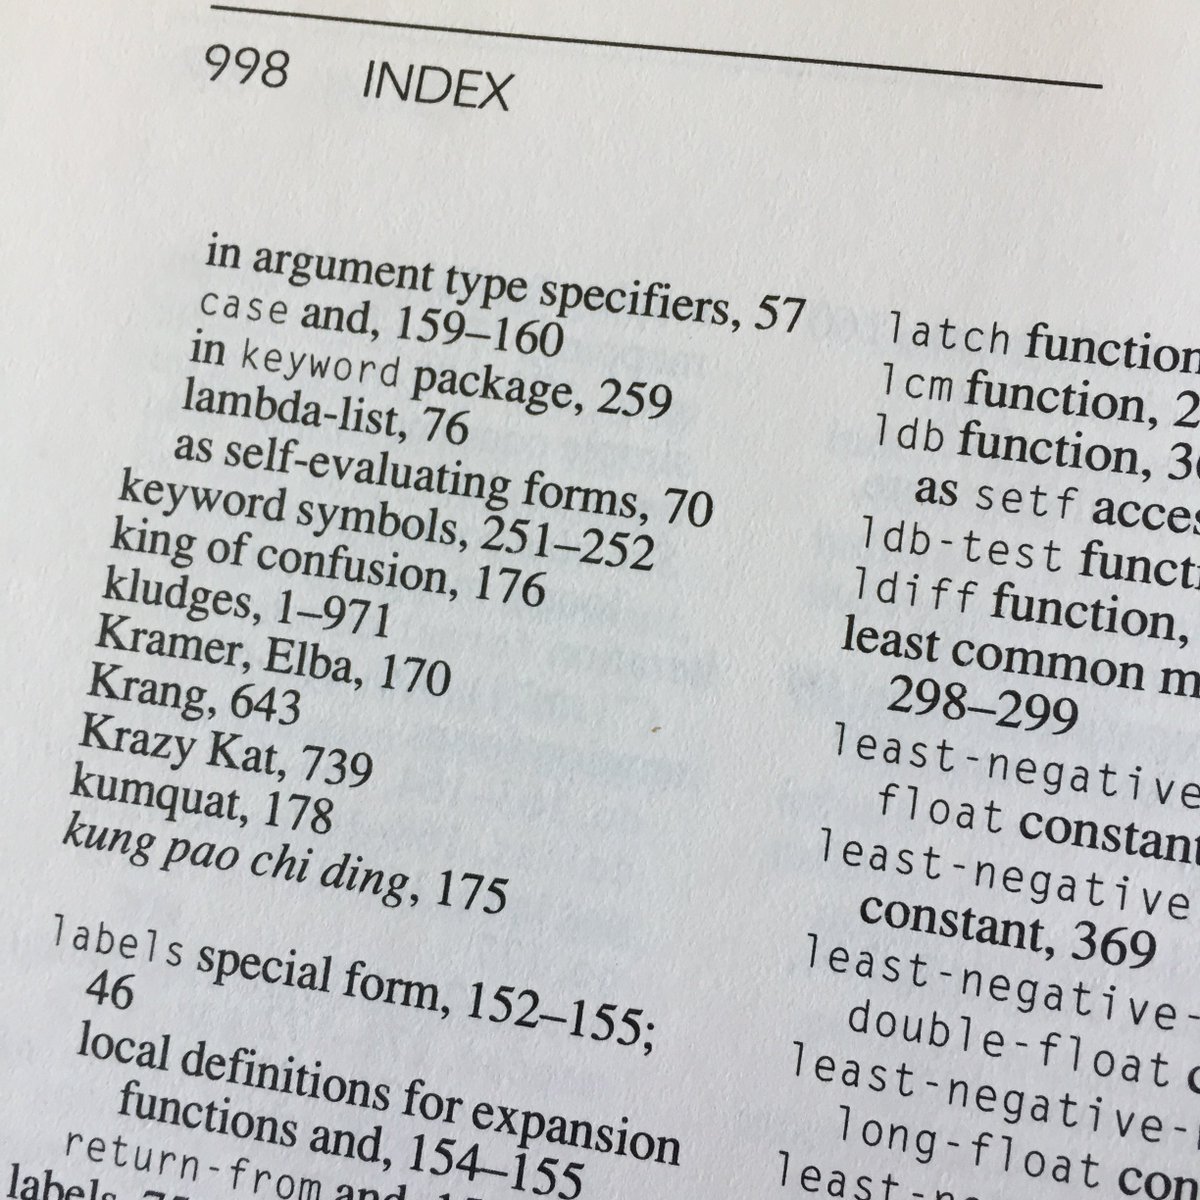 Photo of a page of CLtL2's Index, listing 